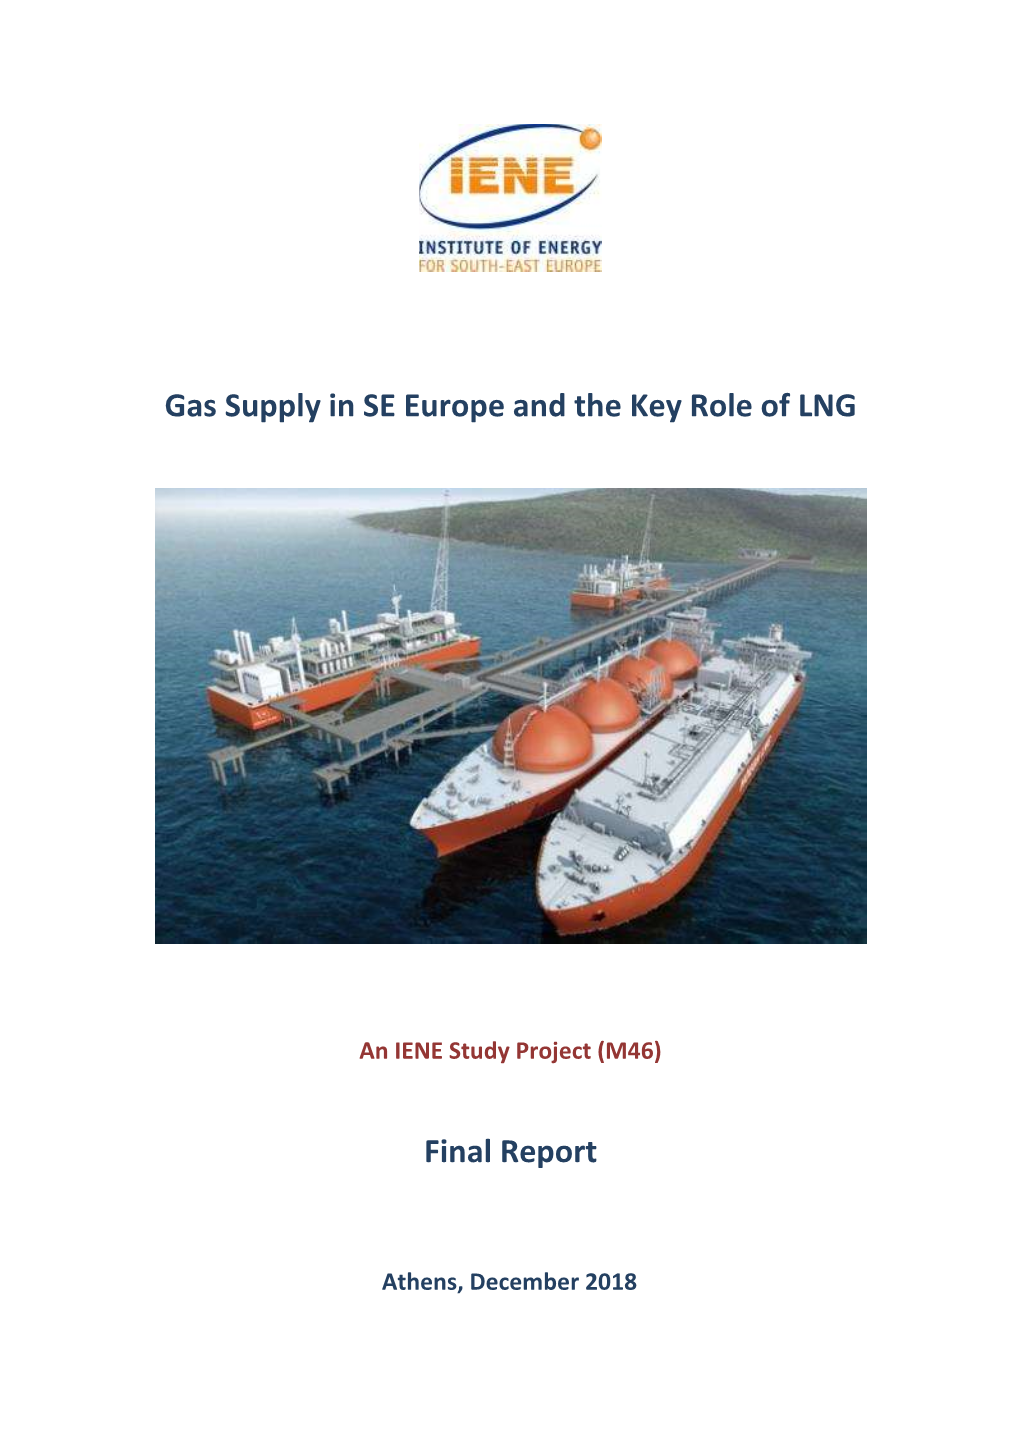 Gas Supply in SE Europe and the Key Role of LNG Final Report